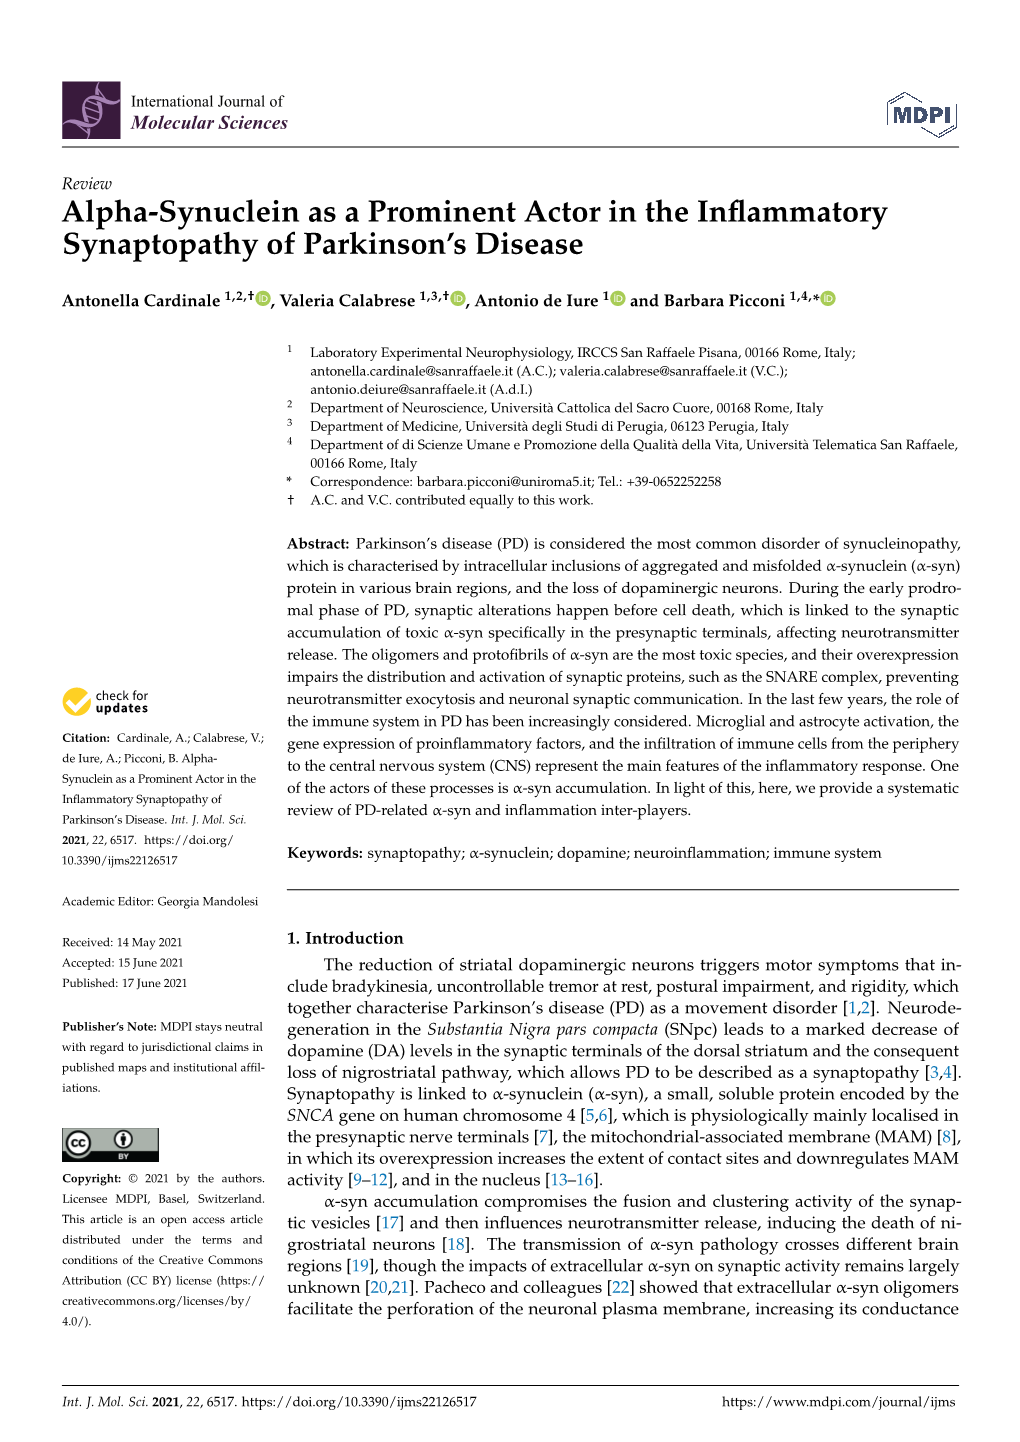 Alpha-Synuclein As a Prominent Actor in the Inflammatory Synaptopathy of Parkinson's Disease